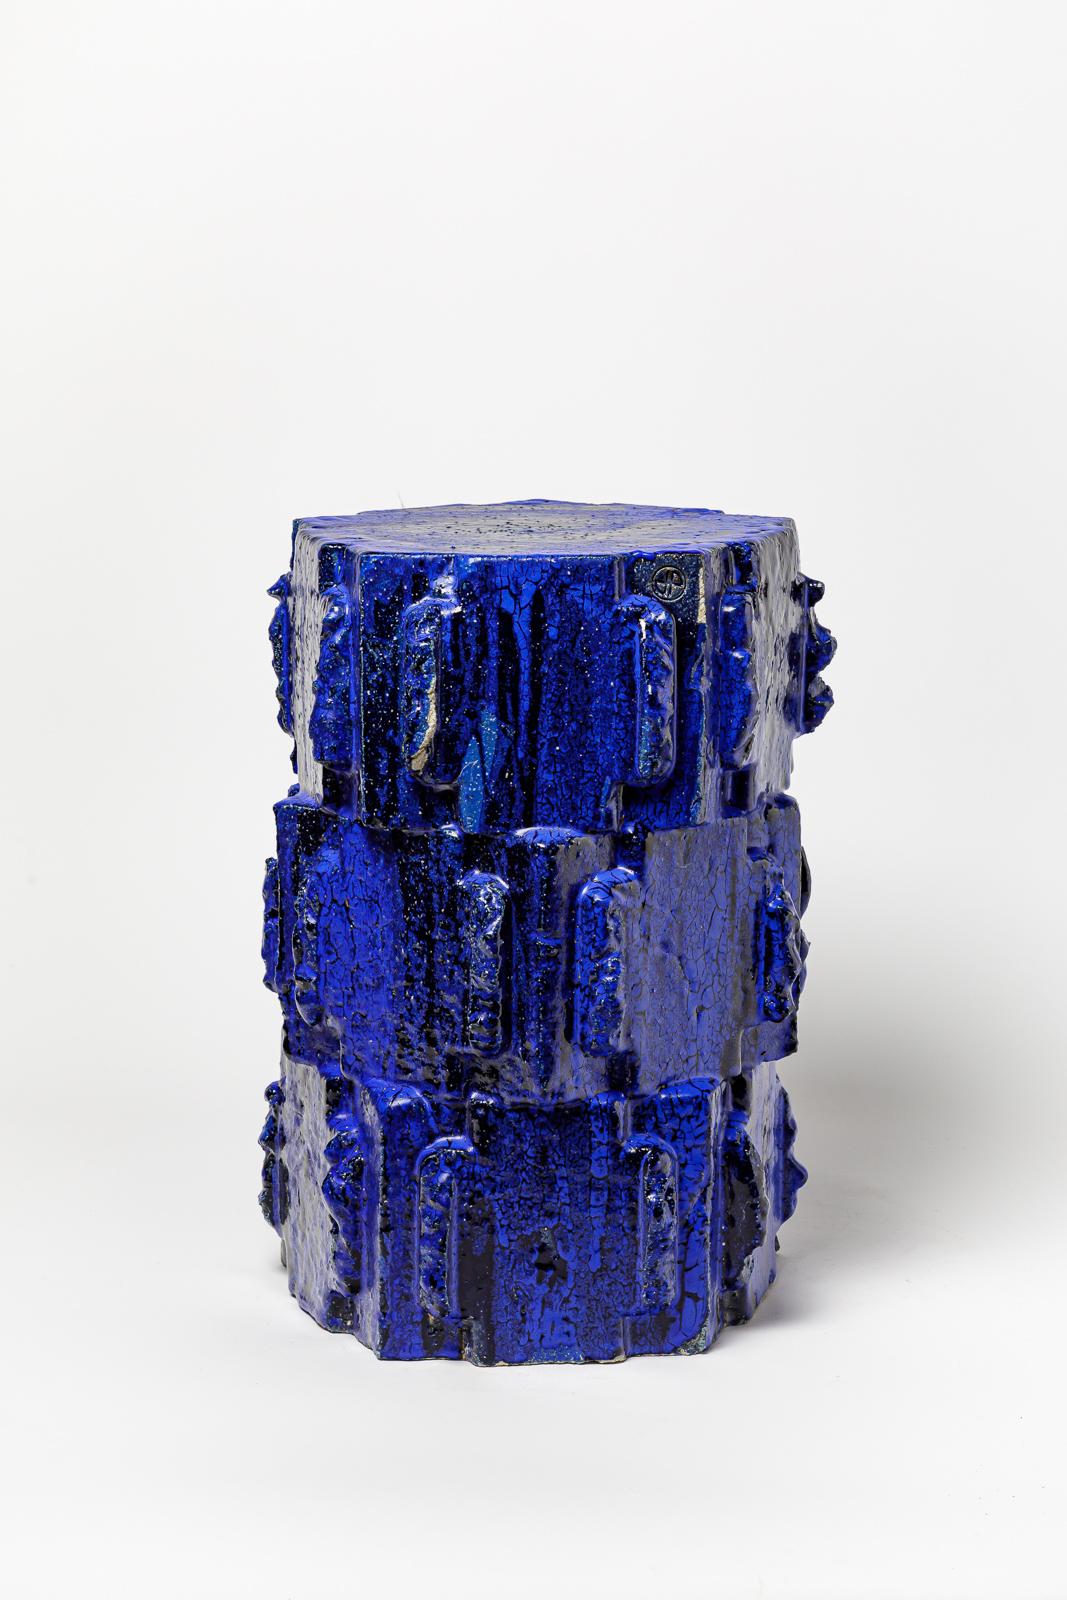 Pair of blue glazed bollène stoneware stool by Jean Ponsart.
Artist monogram at the base. 2023.
H : 20.8’ x 12.6’ x 10.8 inches.